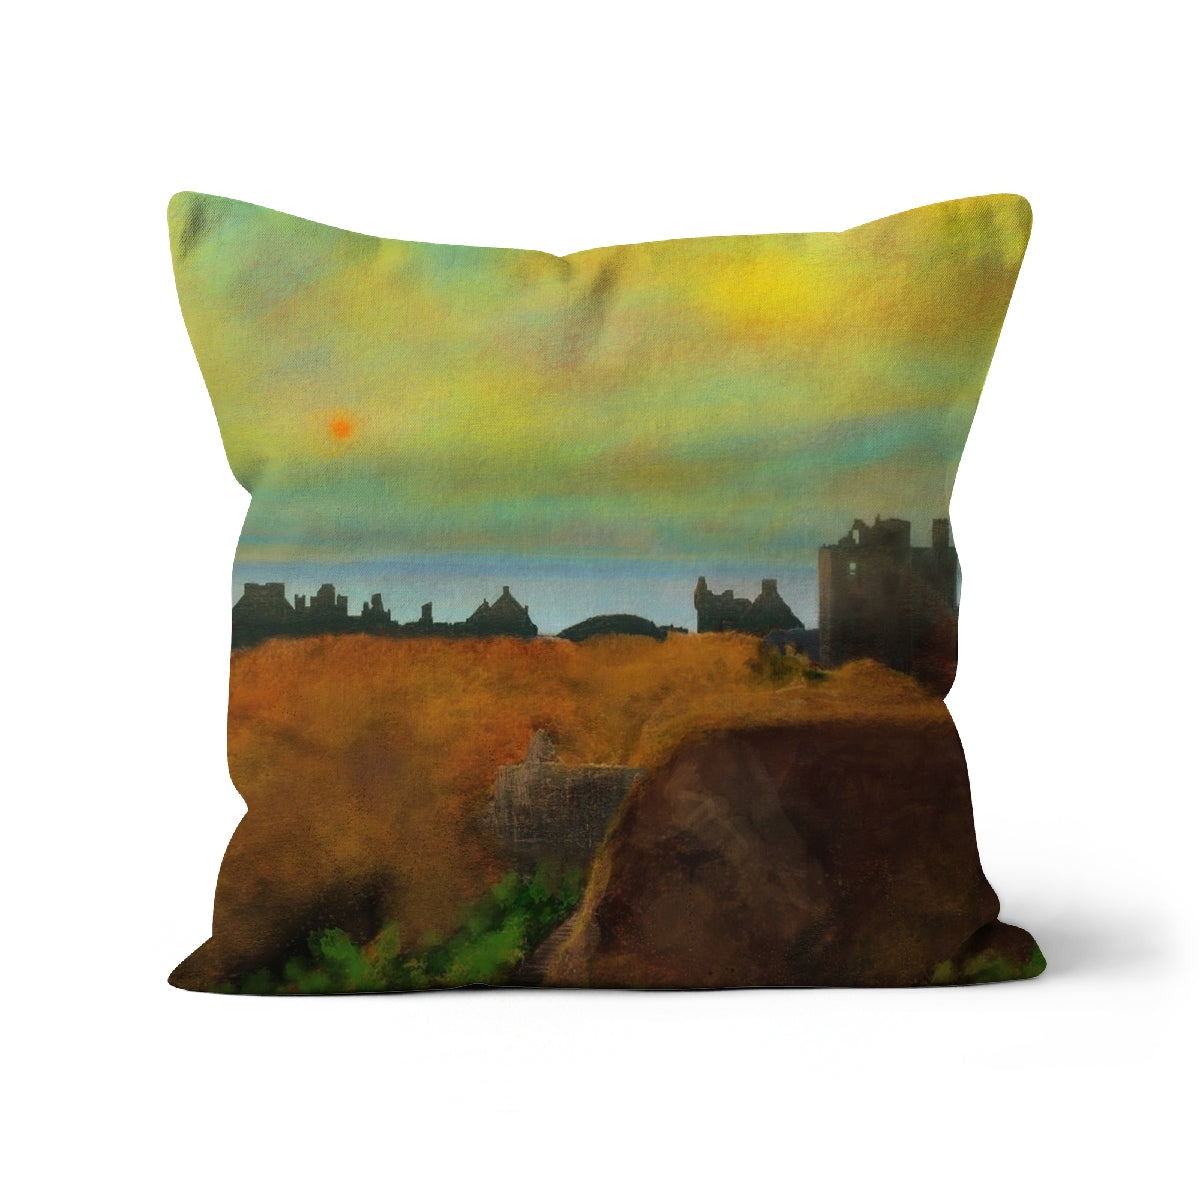 Dunnottar Castle Art Gifts Cushion-Cushions-Historic & Iconic Scotland Art Gallery-Canvas-18"x18"-Paintings, Prints, Homeware, Art Gifts From Scotland By Scottish Artist Kevin Hunter